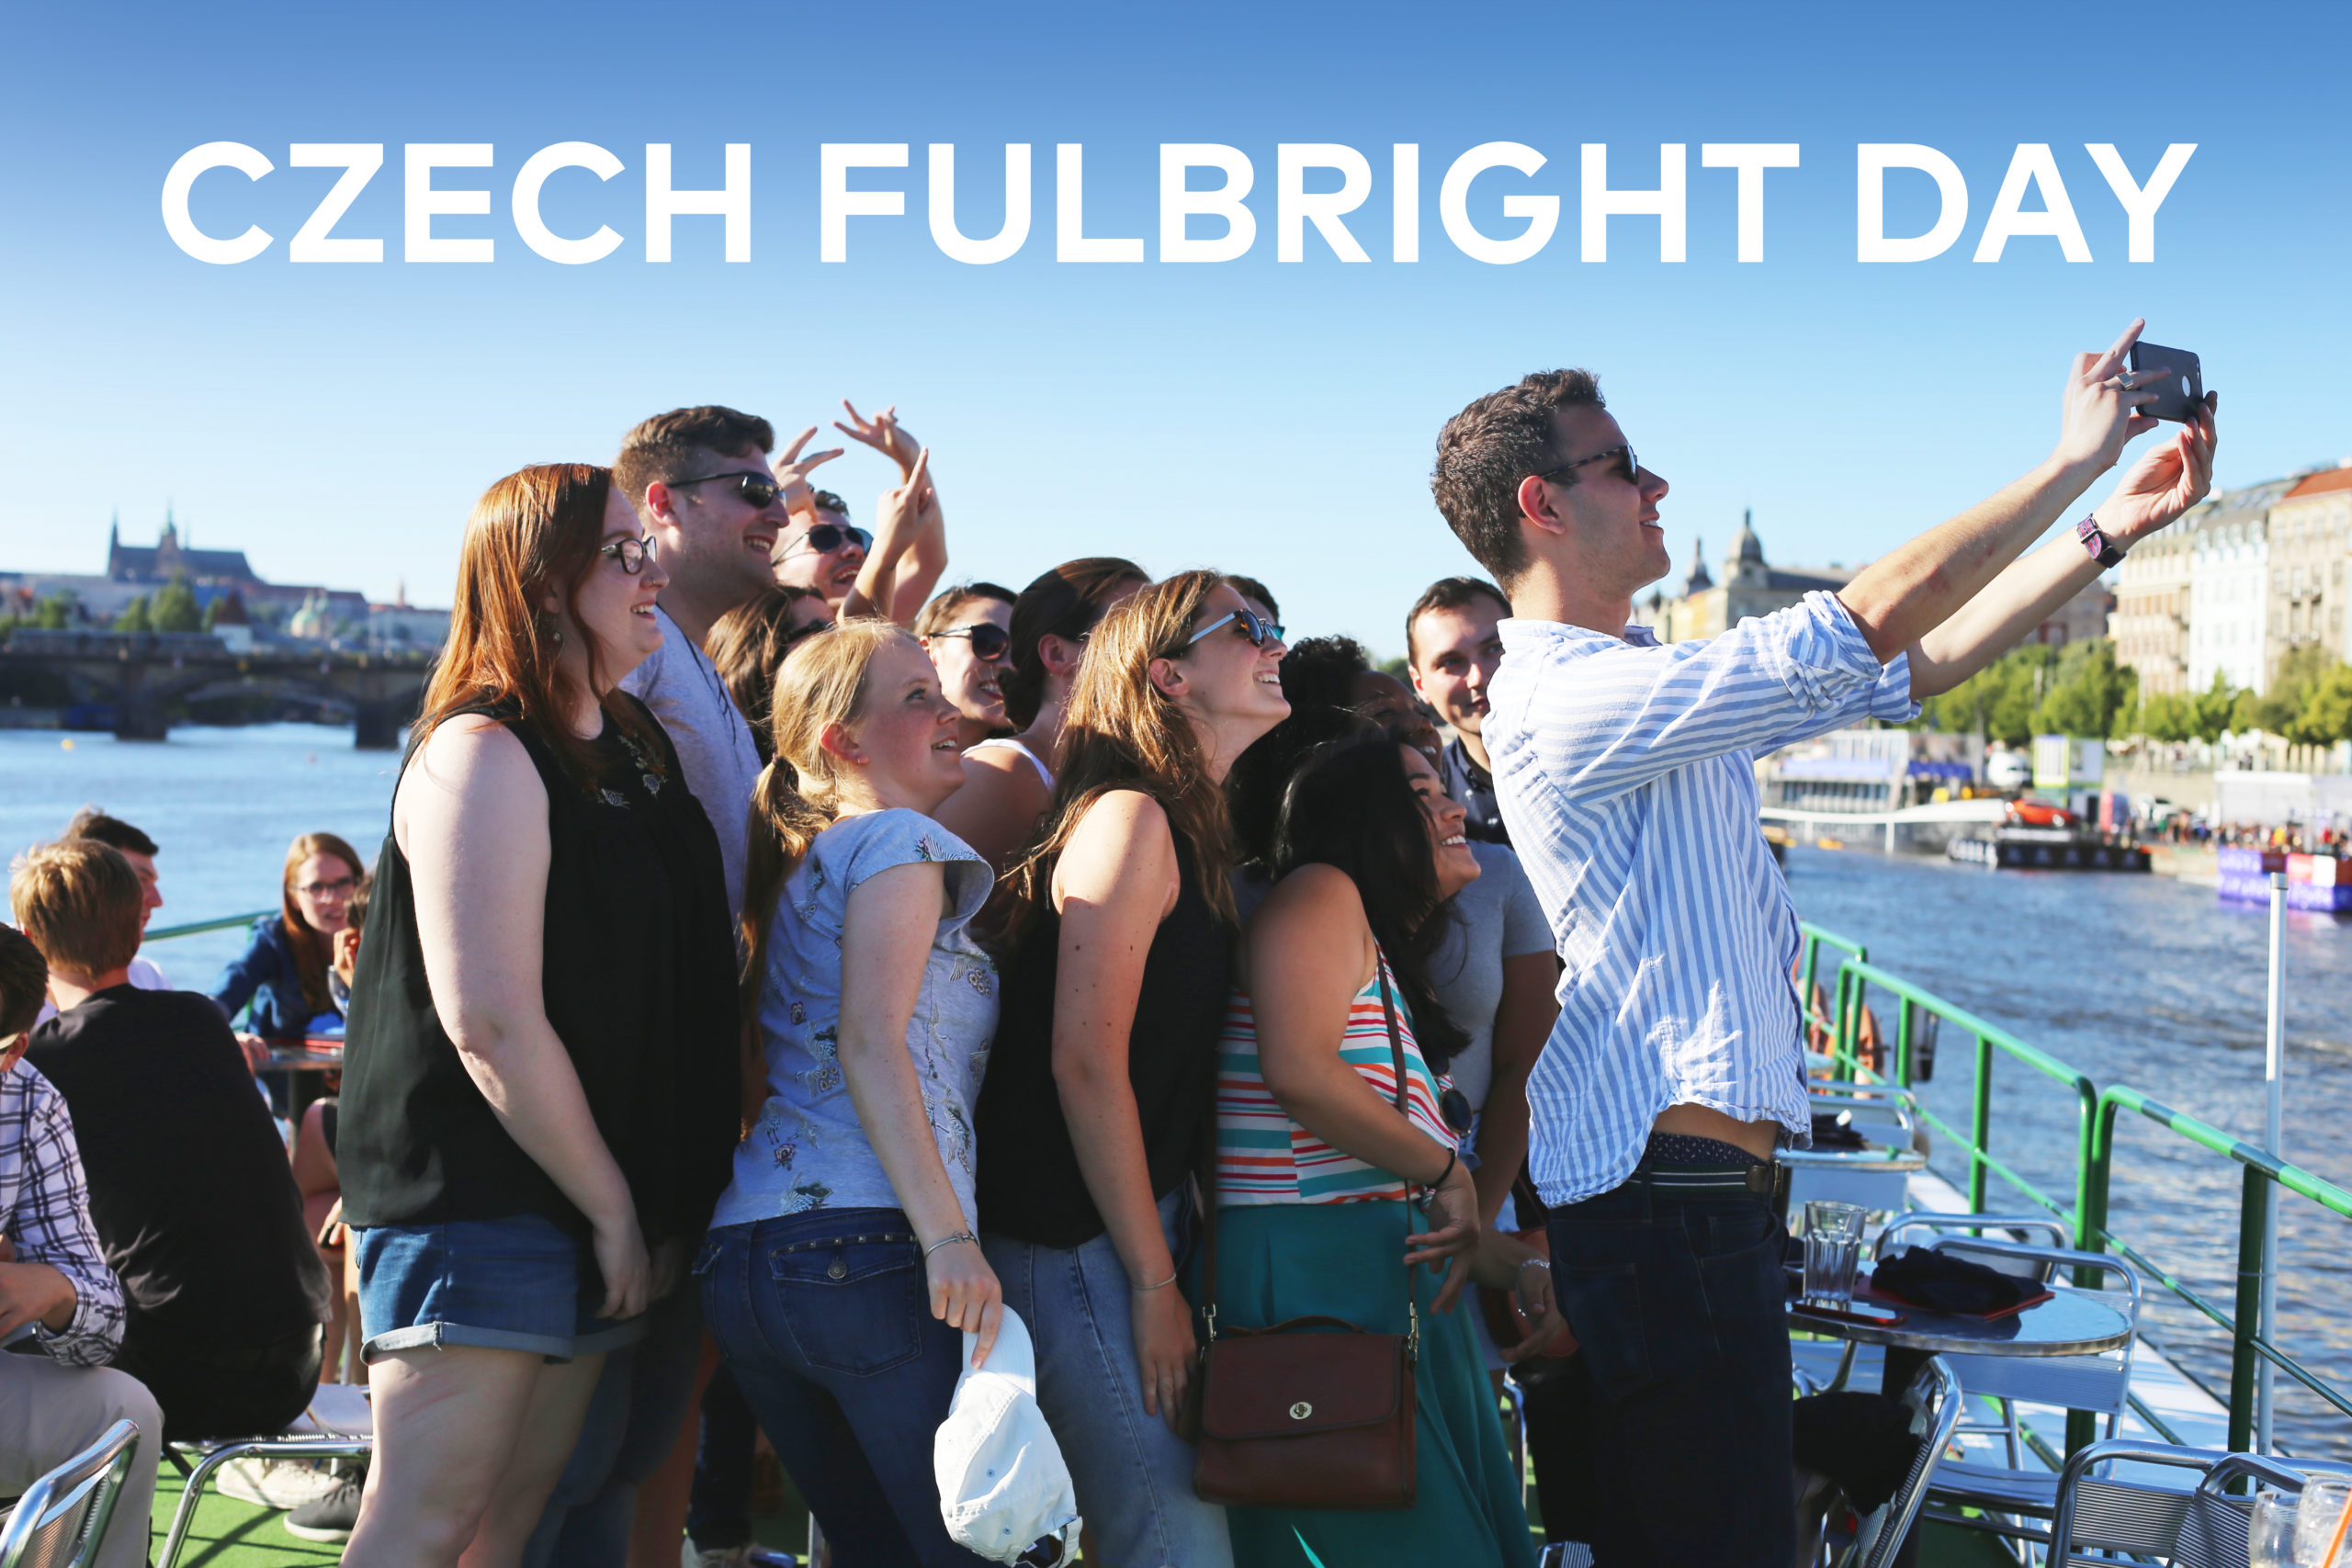 A photo of a group of young people outside taking a selfie with the text "Czech Fulbright Day" in white at the top